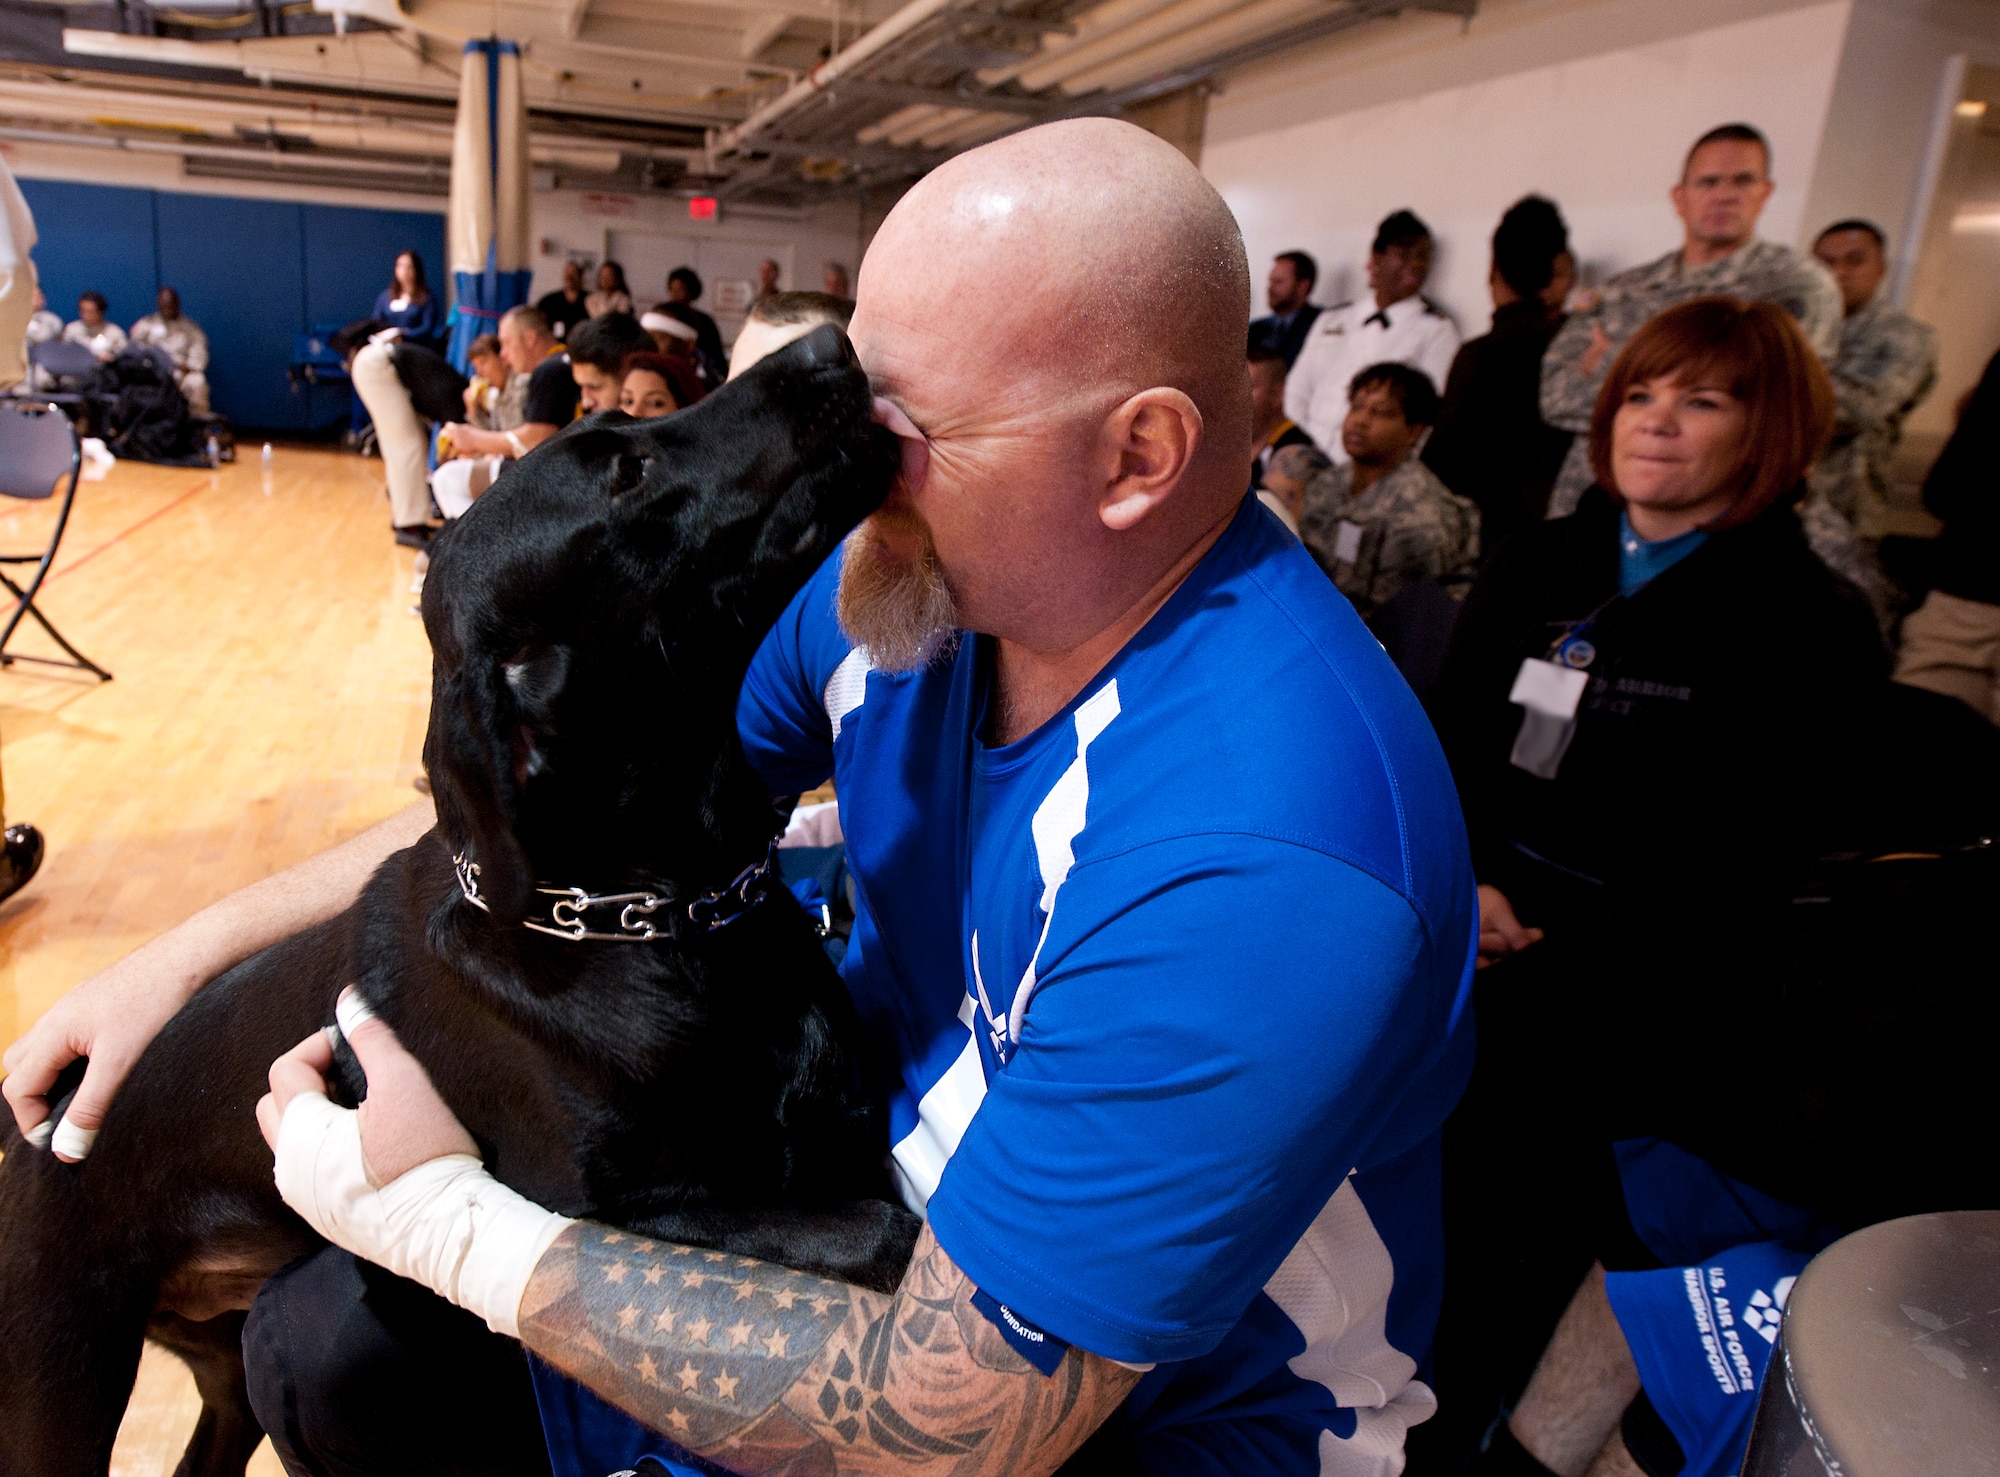 Retired Tech. Sgt. Keith Sekora receives a kiss from his dog, Pintler, during the 4th Annual Pentagon Sitting Volleyball Tournament Nov. 20, 2014, at the Pentagon Athletic Club.  In conjunction with Warrior Care Month, wounded warriors from each service's warrior transition units, as well as U.S. Special Operations Command, participated in the tournament. Sekora received a Silver Medal for Compound Team Archery in the Warrior Games 2013. (U.S. Air Force photo/Staff Sgt. Anthony Nelson Jr.) 